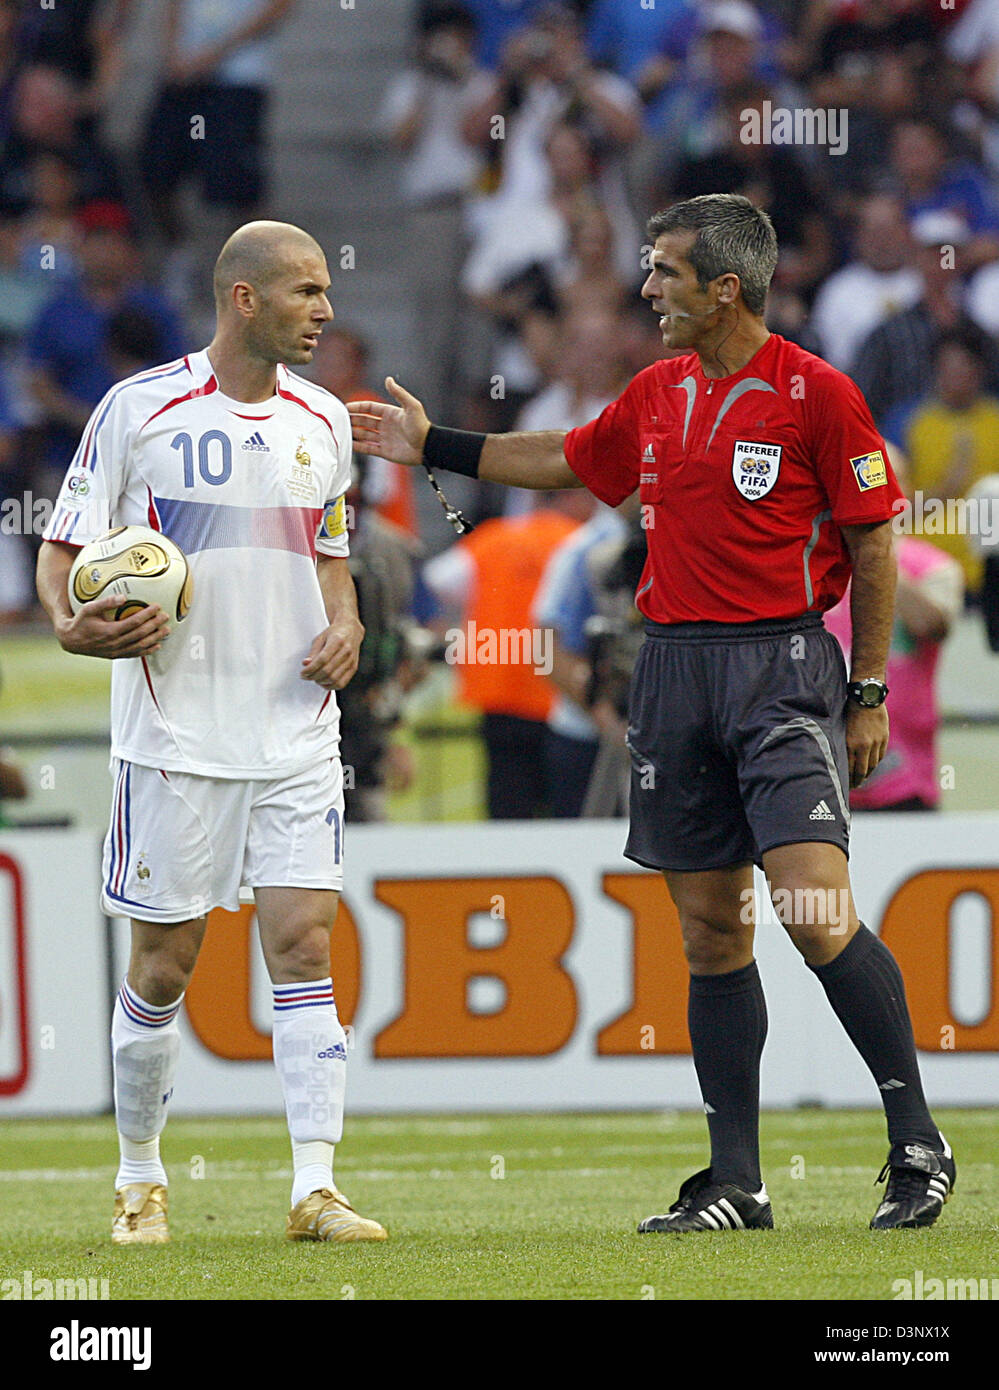 French Zinedine Zidane (L) talks to Argentinian referee Horacio Elizondo (R) during the final of the 2006 FIFA World Cup  Italy vs. France at the Olympic Stadium in Berlin, Germany, Sunday 09 July 2006. Photo: KAY NIETFELD +++ Mobile Services OUT +++ Please refer to FIFA's Terms and Conditions. Stock Photo